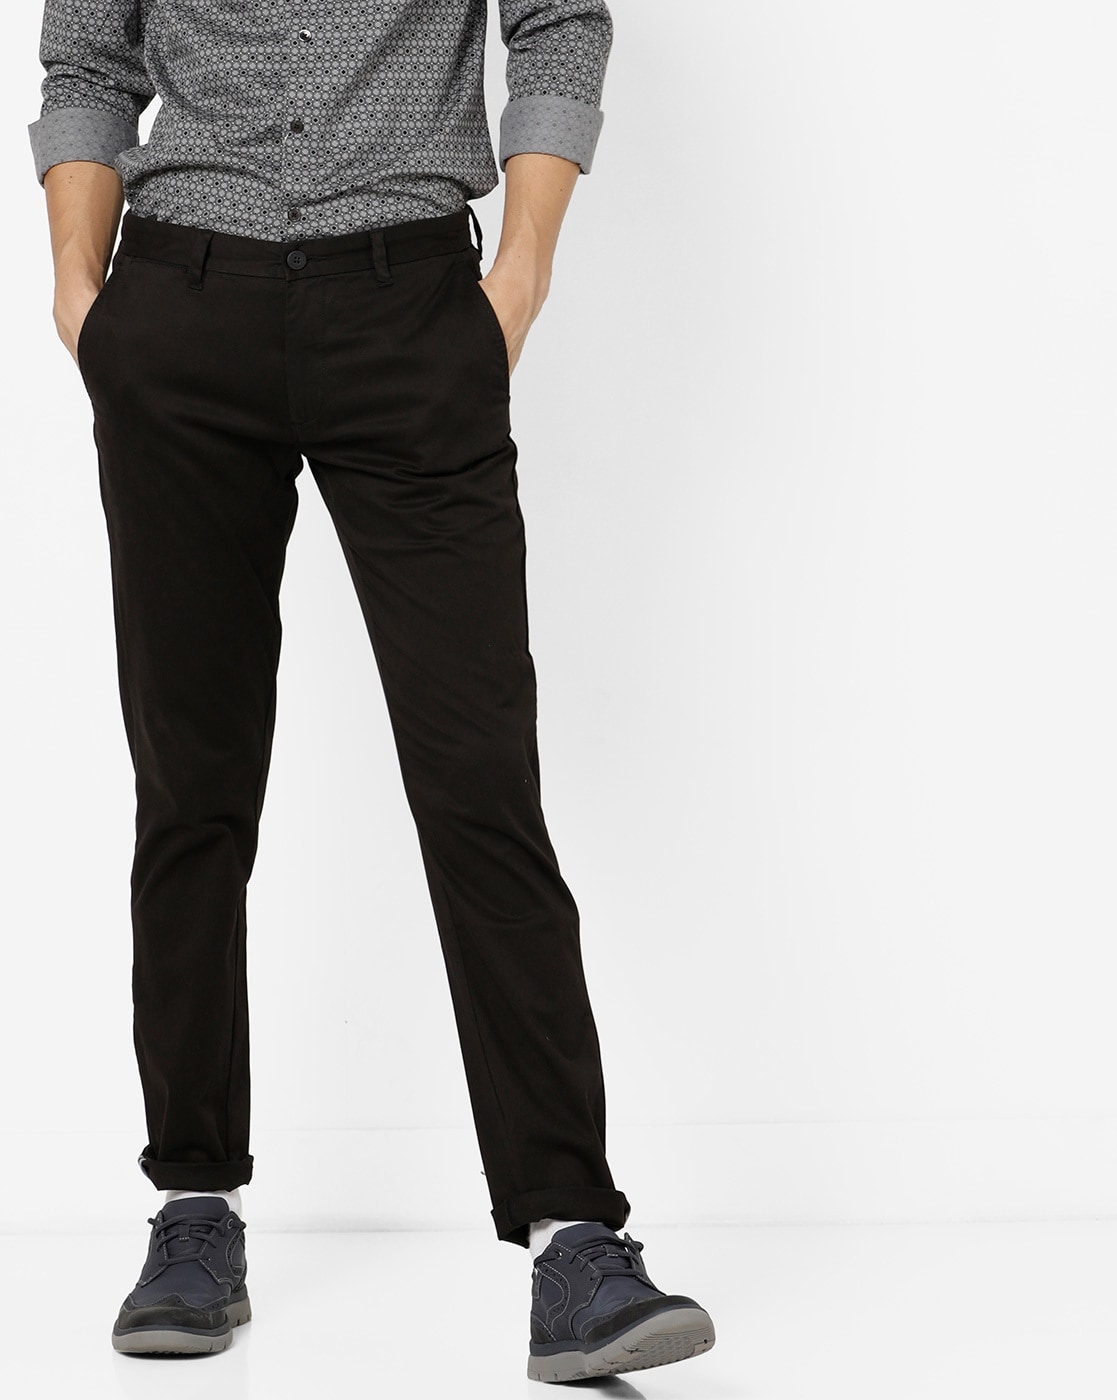 These Are the Best Travel Pants For Men  Dollar Flight Club